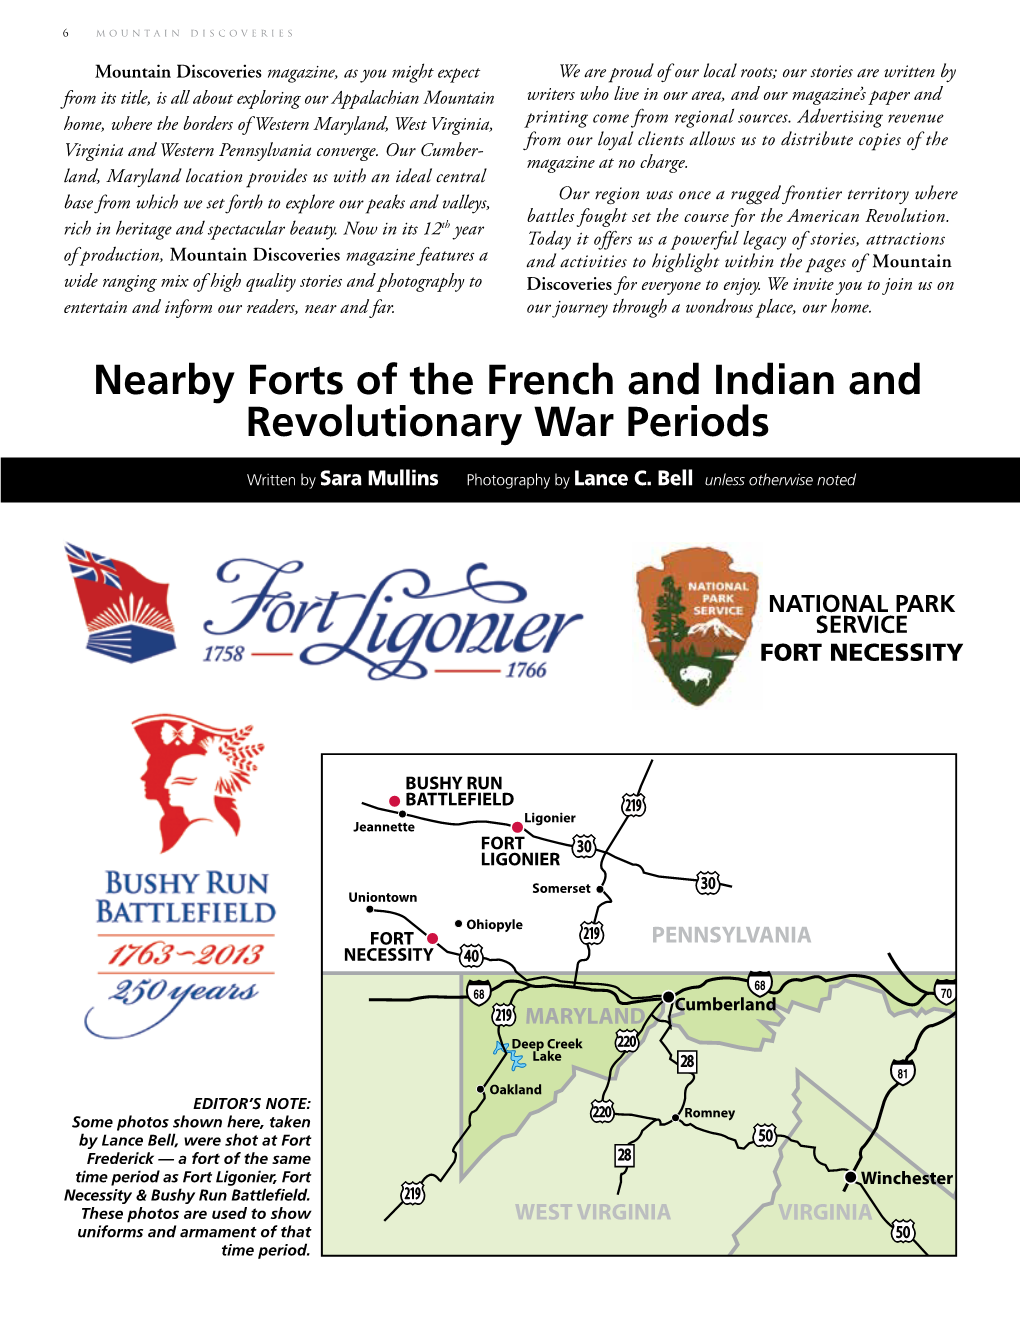 Nearby Forts of the French and Indian and Revolutionary War Periods